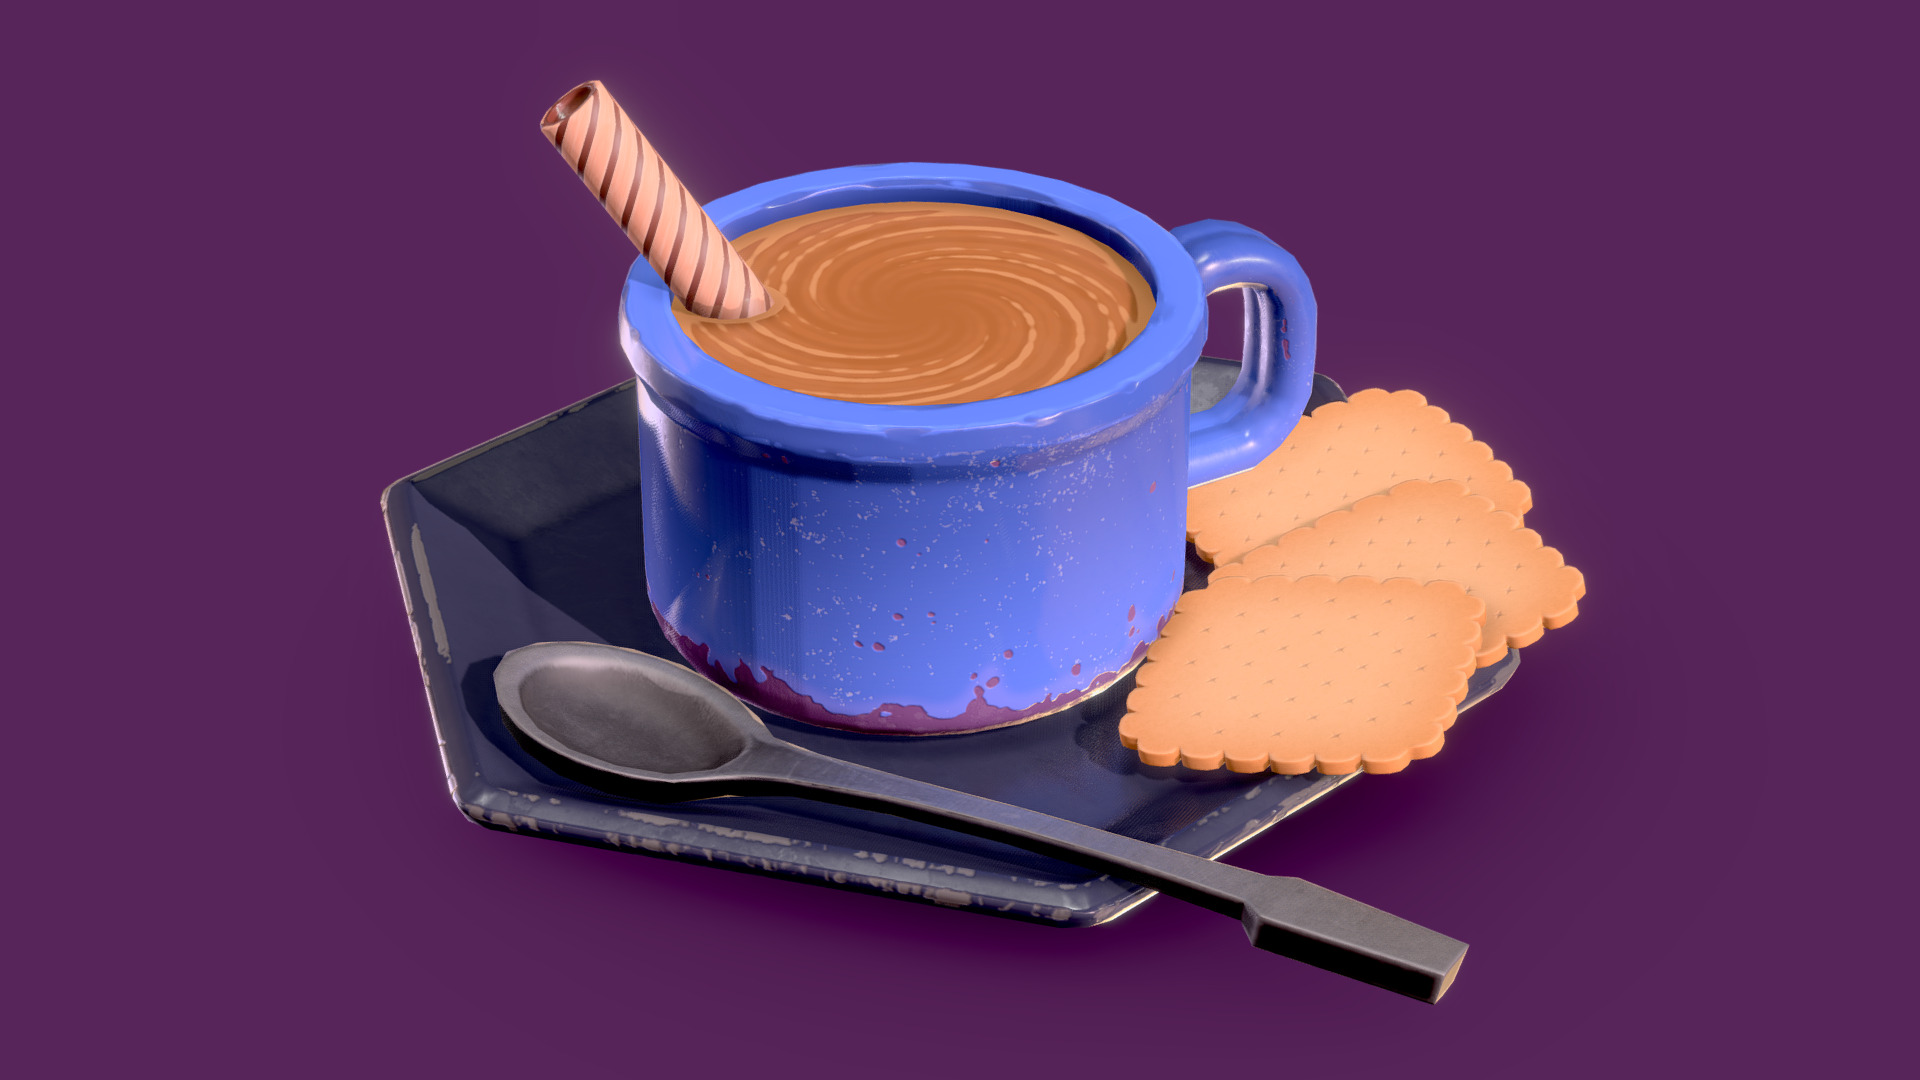 3D model Stay Toasty - This is a 3D model of the Stay Toasty. The 3D model is about a blue cup with a spoon and a piece of cheese on a plate.